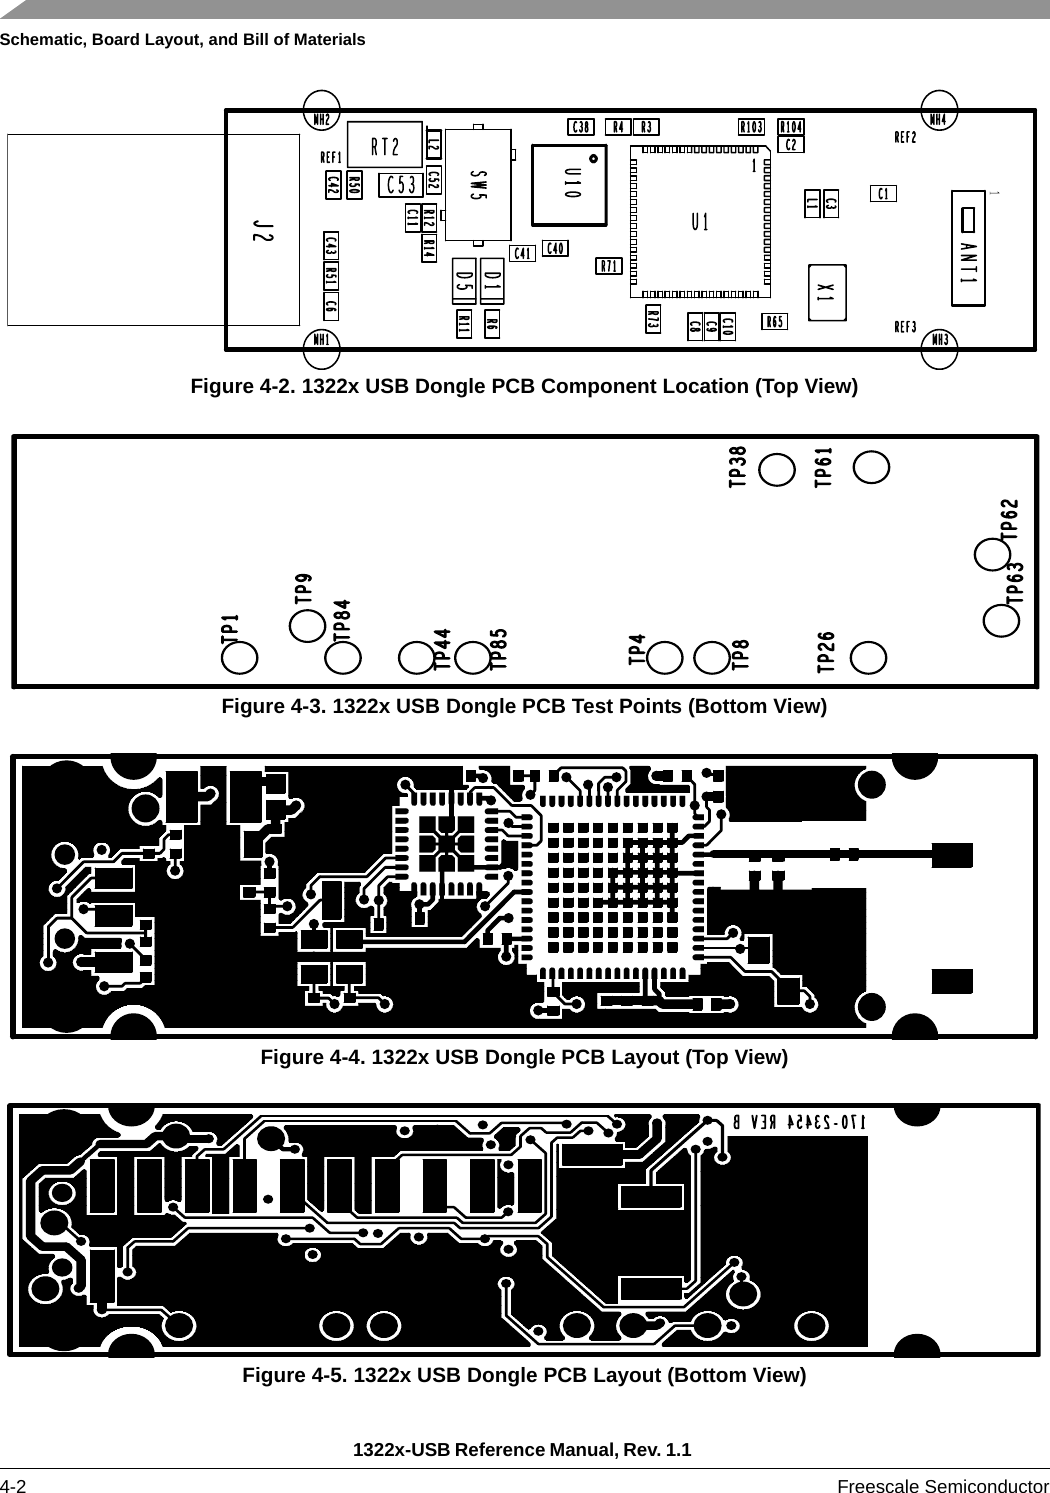 Schematic, Board Layout, and Bill of Materials1322x-USB Reference Manual, Rev. 1.1 4-2 Freescale SemiconductorFigure 4-2. 1322x USB Dongle PCB Component Location (Top View)Figure 4-3. 1322x USB Dongle PCB Test Points (Bottom View)Figure 4-4. 1322x USB Dongle PCB Layout (Top View)Figure 4-5. 1322x USB Dongle PCB Layout (Bottom View)